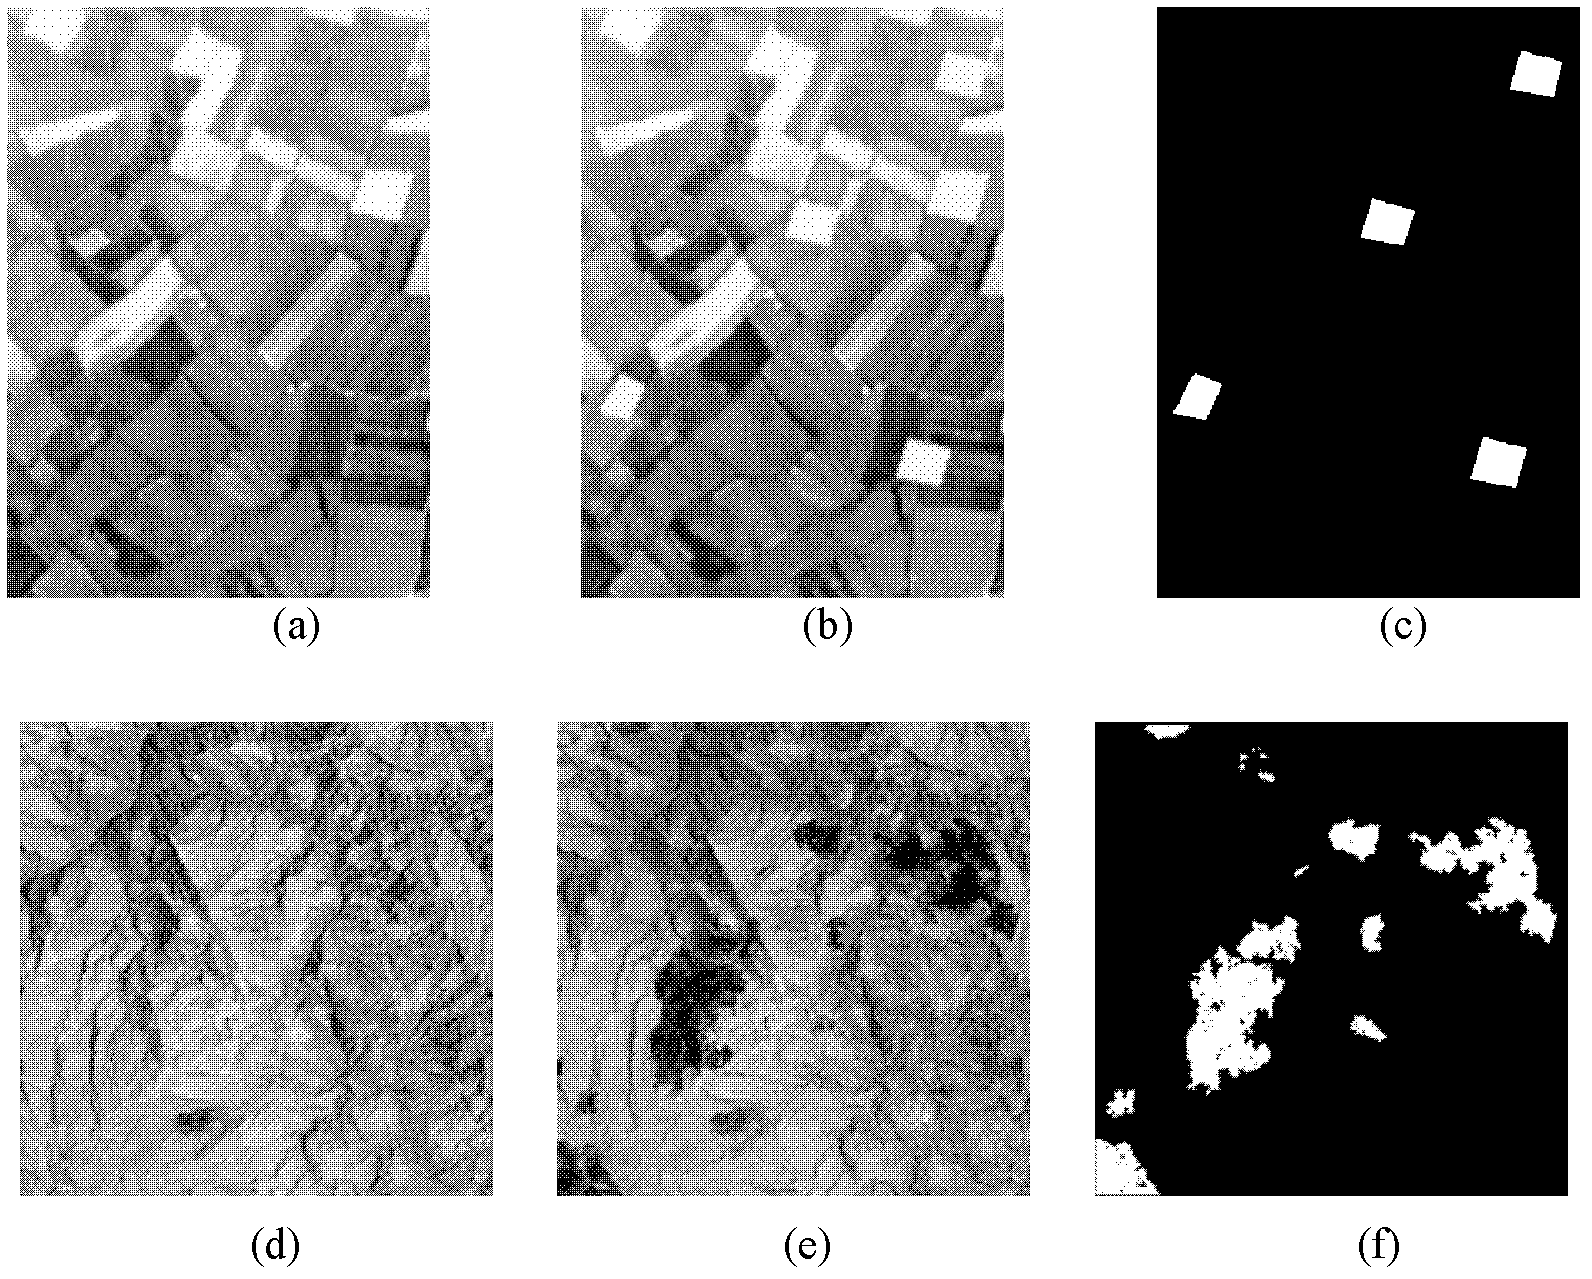 Remote sensing image change detection method based on multi-feature fusion